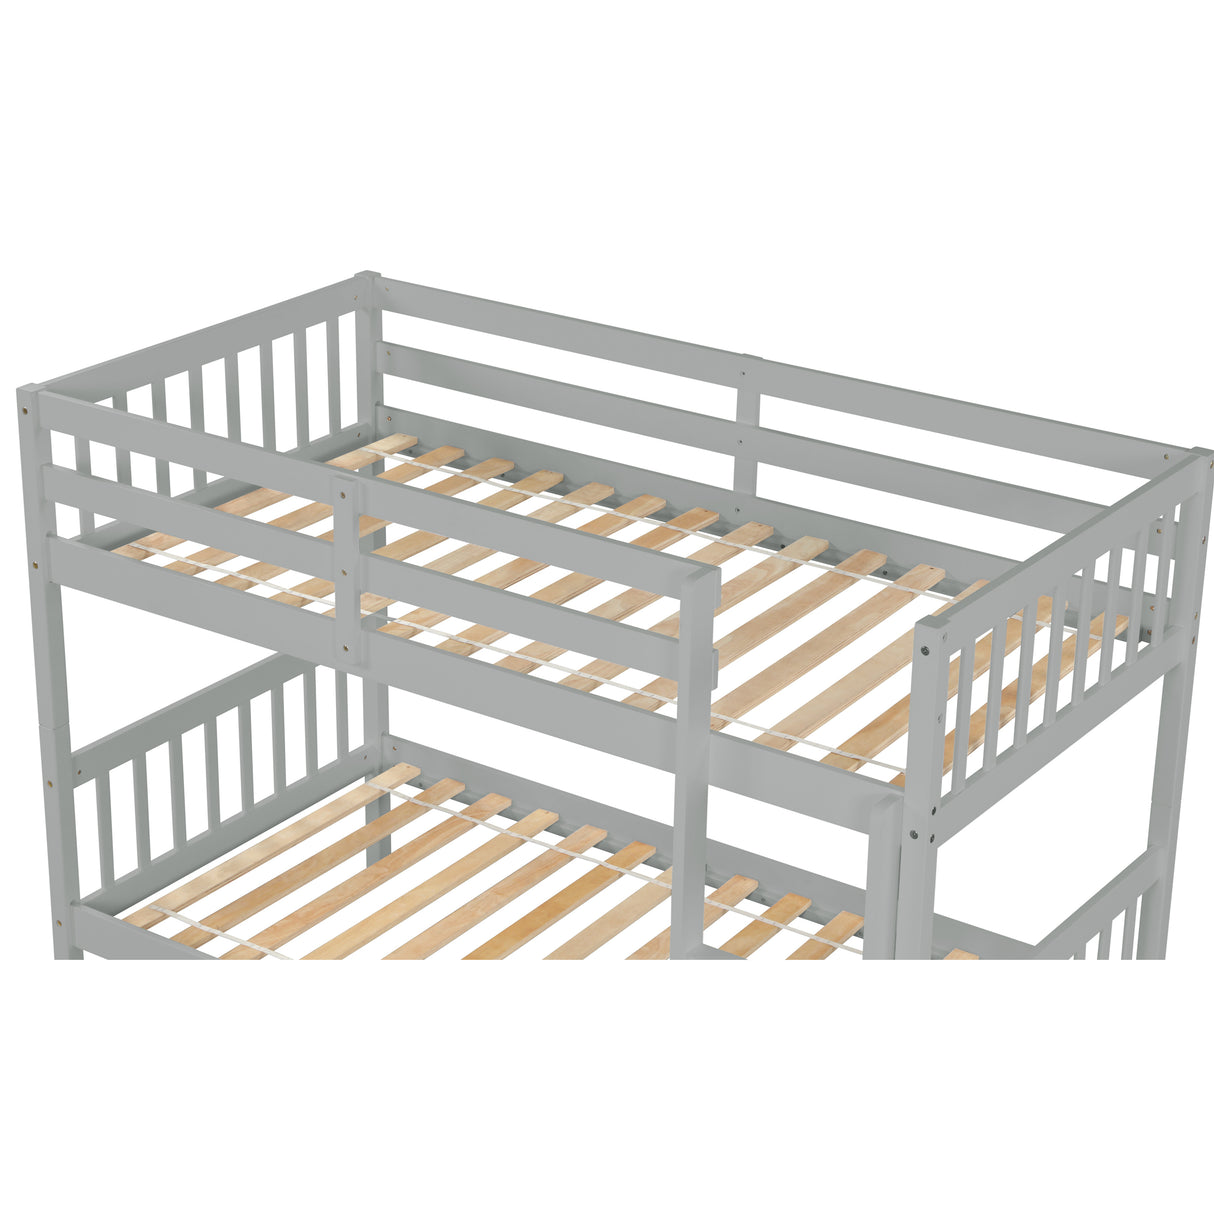 Twin Over Twin Bunk Beds with Trundle, Solid Wood Trundle Bed Frame with Safety Rail and Ladder, Kids/Teens Bedroom, Guest Room Furniture, Can Be converted into 2 Beds,Grey (Old Sku:W504S00027) - Home Elegance USA